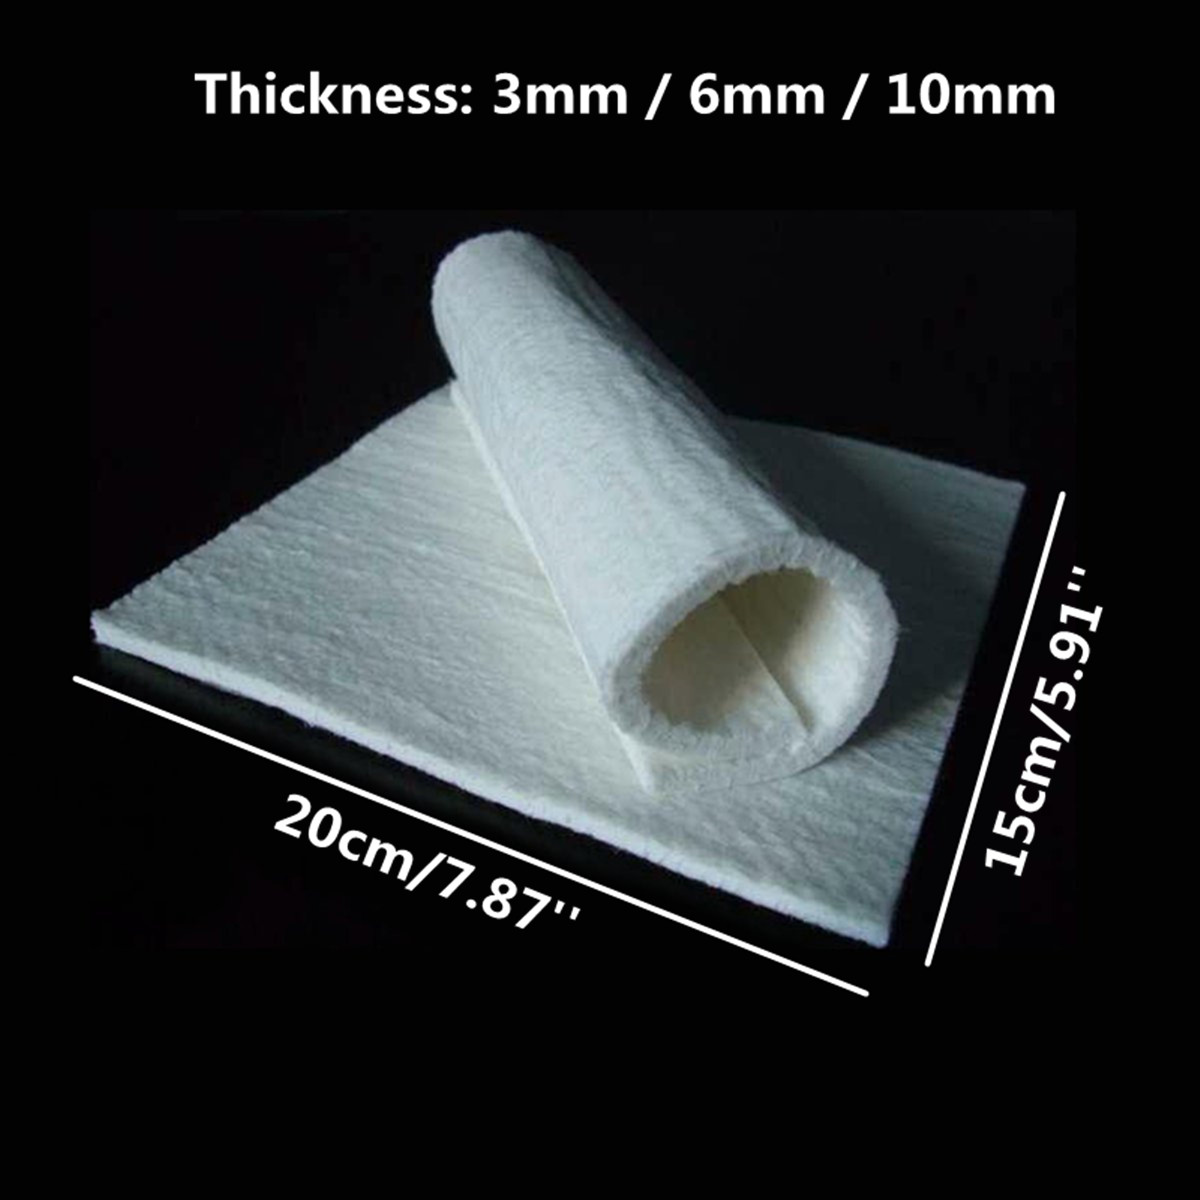 3610mm-Aerogel-Insulation-Hydrophobic-Mat-Foot-Low-to-High-Temp-20x15cm-Water-Pipe-Insulation-Mat-1321399-2